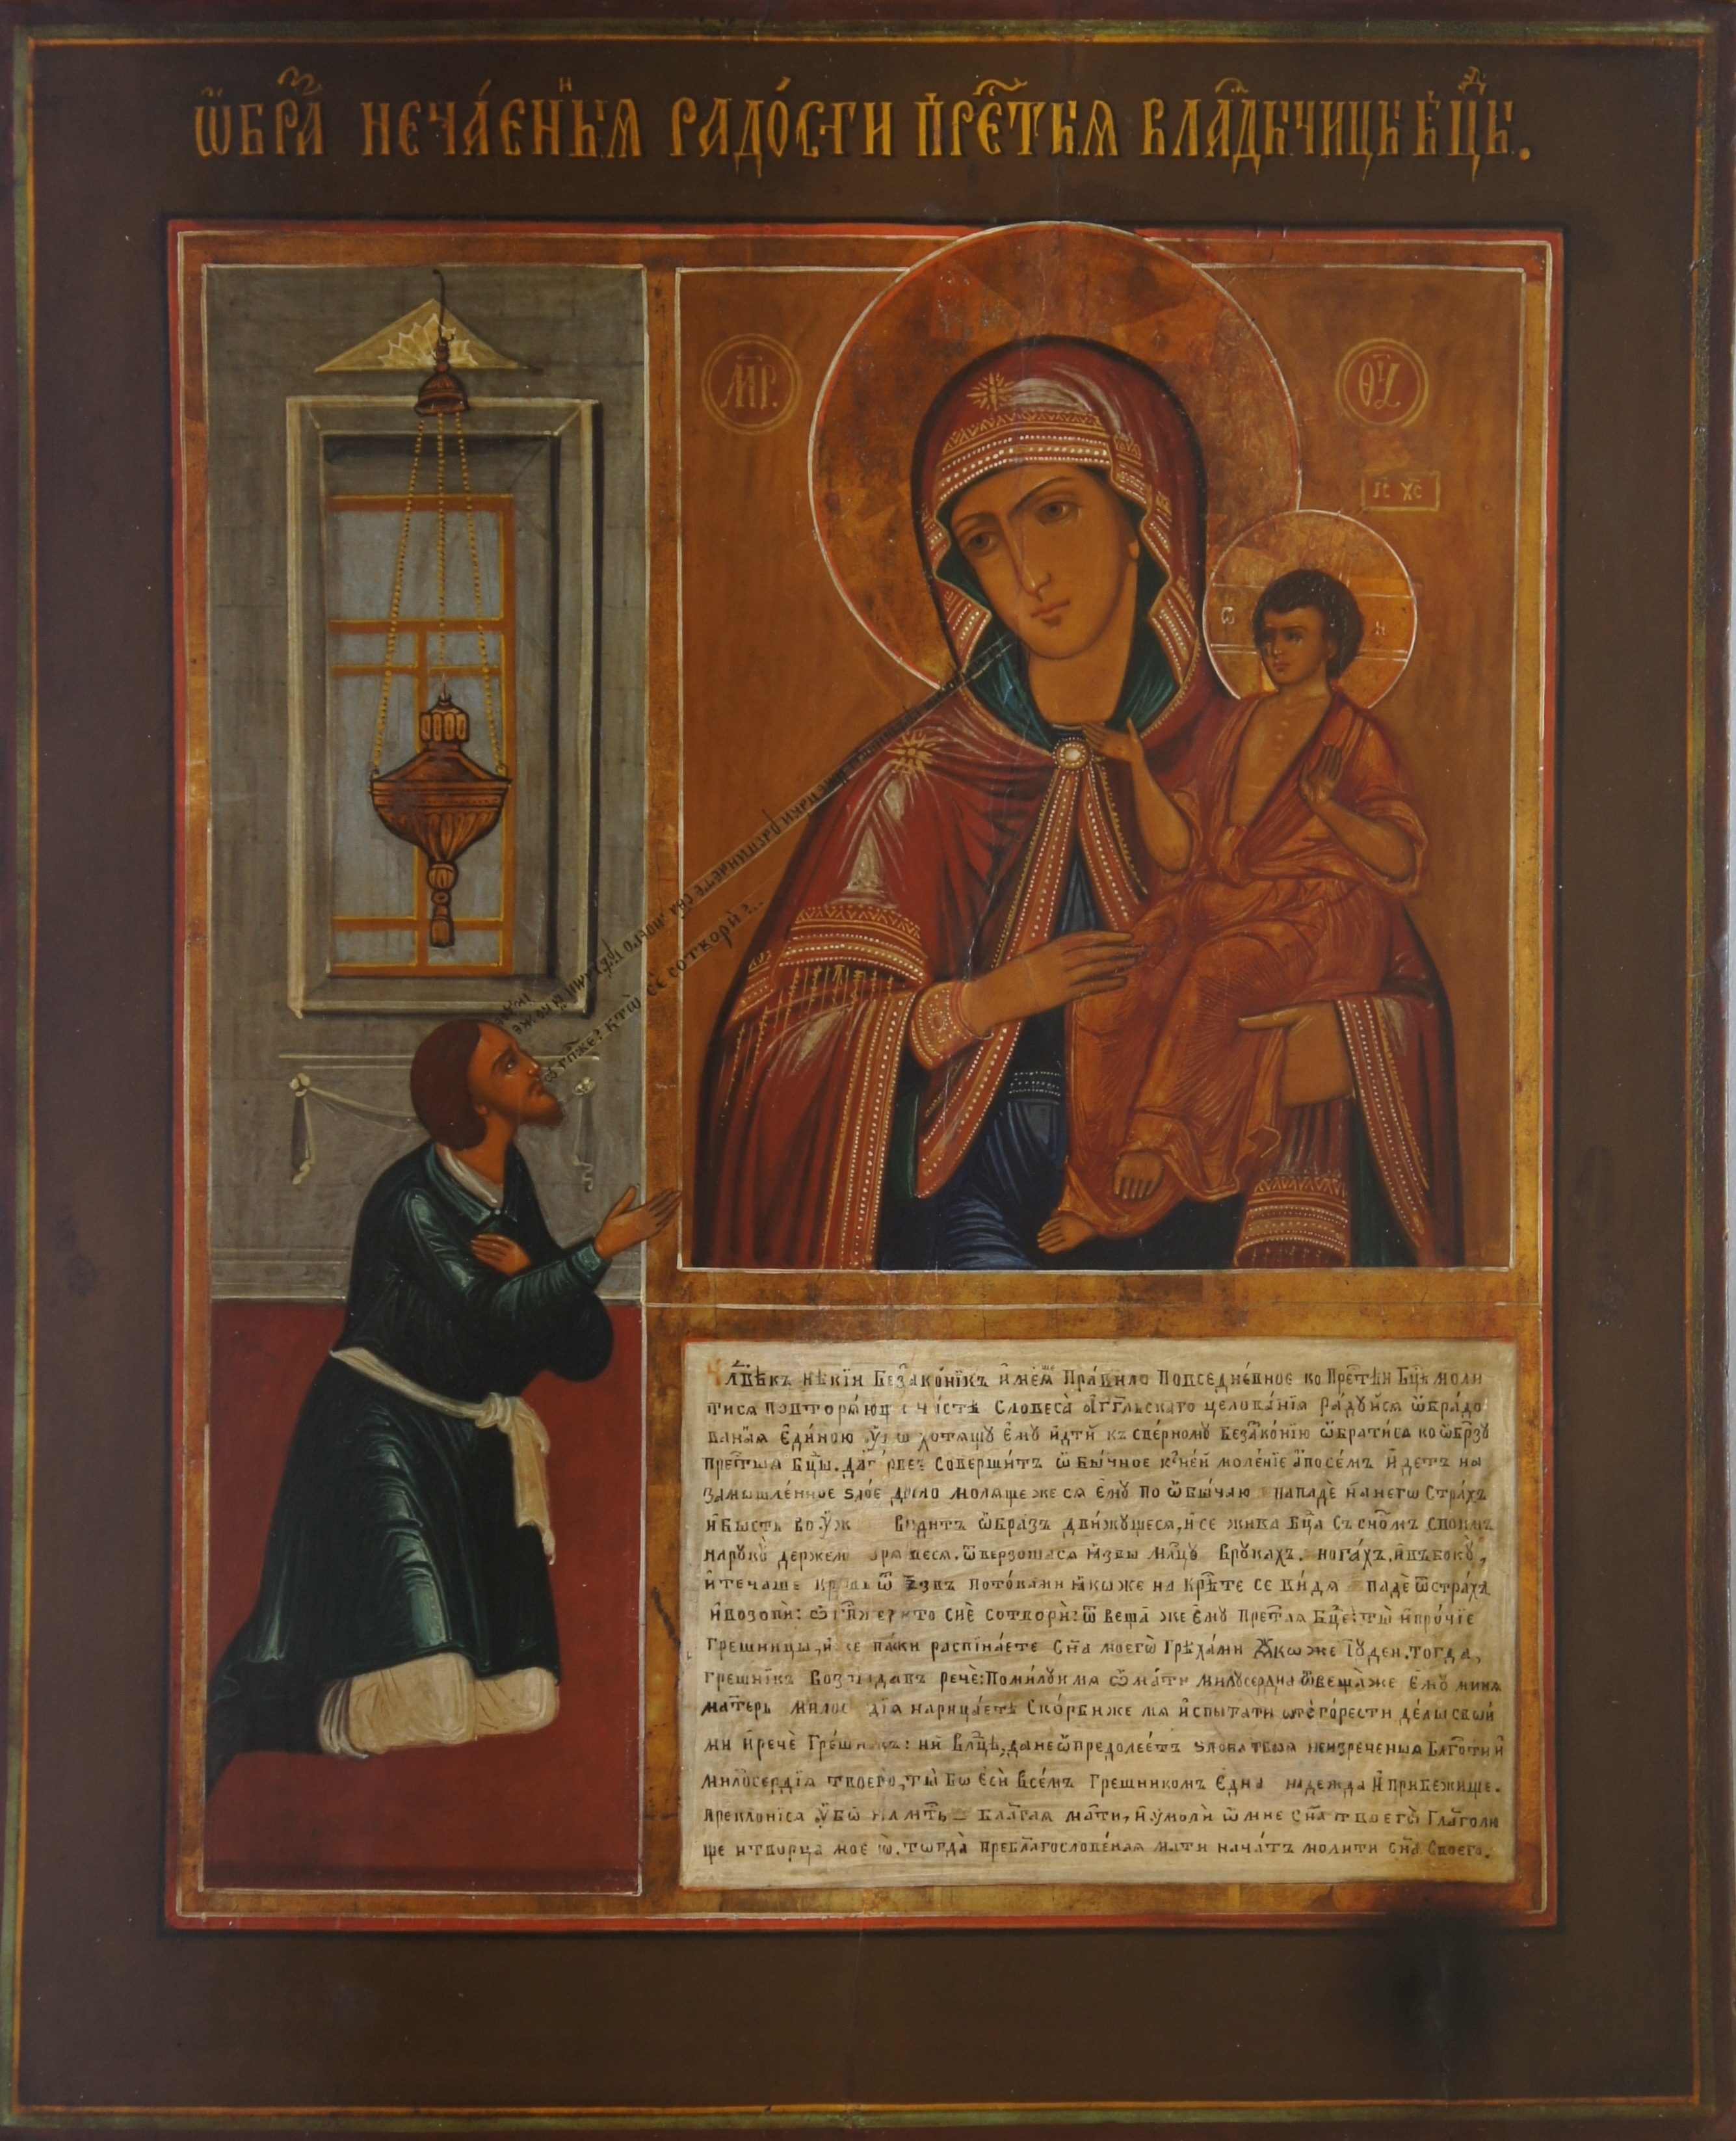 Photo of icon after painting restoration